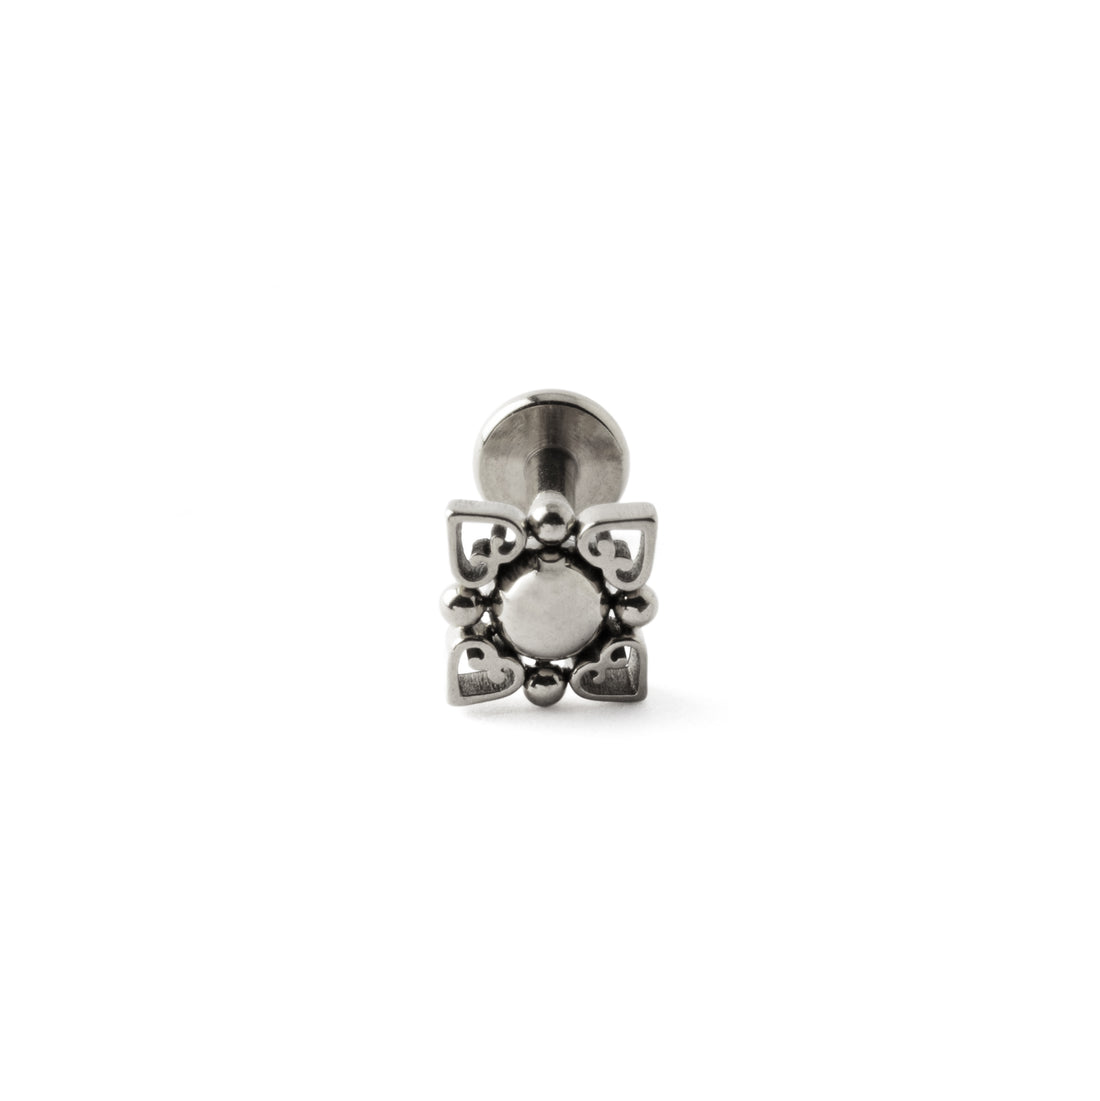 Neptune surgical steel internally threaded Labret stud frontal view